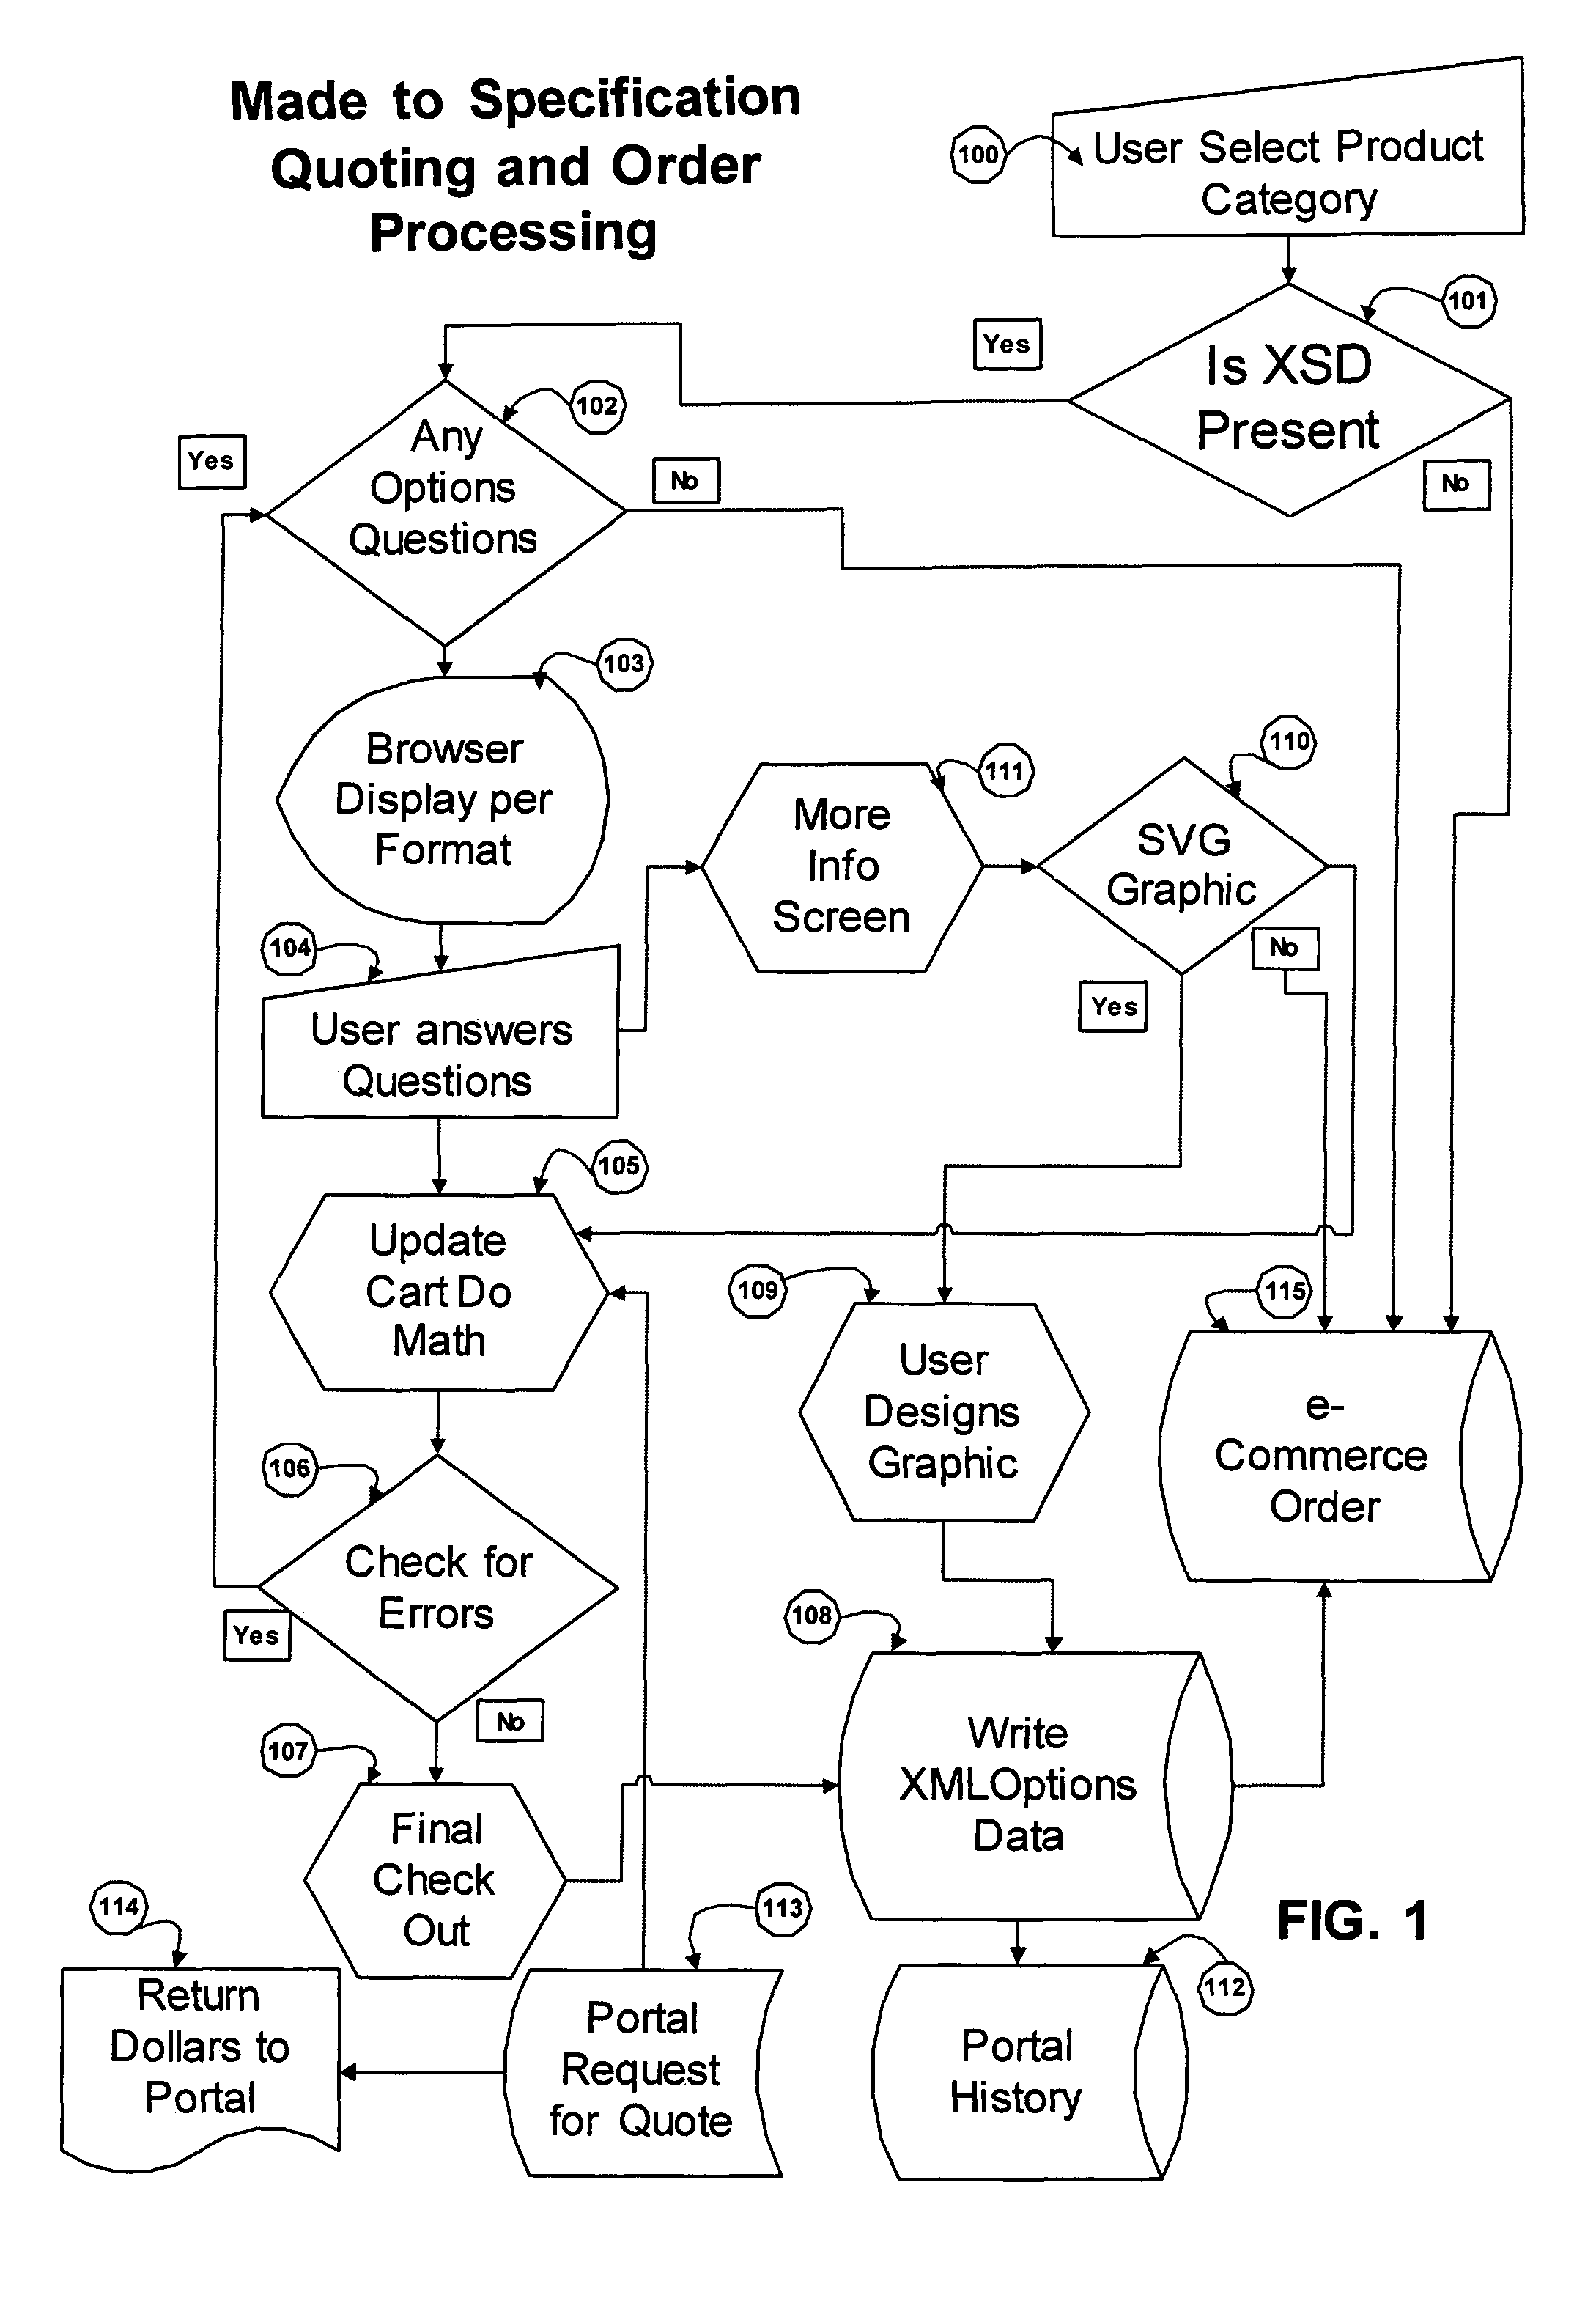 System and method for a made to specification e-commerce quoting and orders processing system on a stand alone or integrated portal